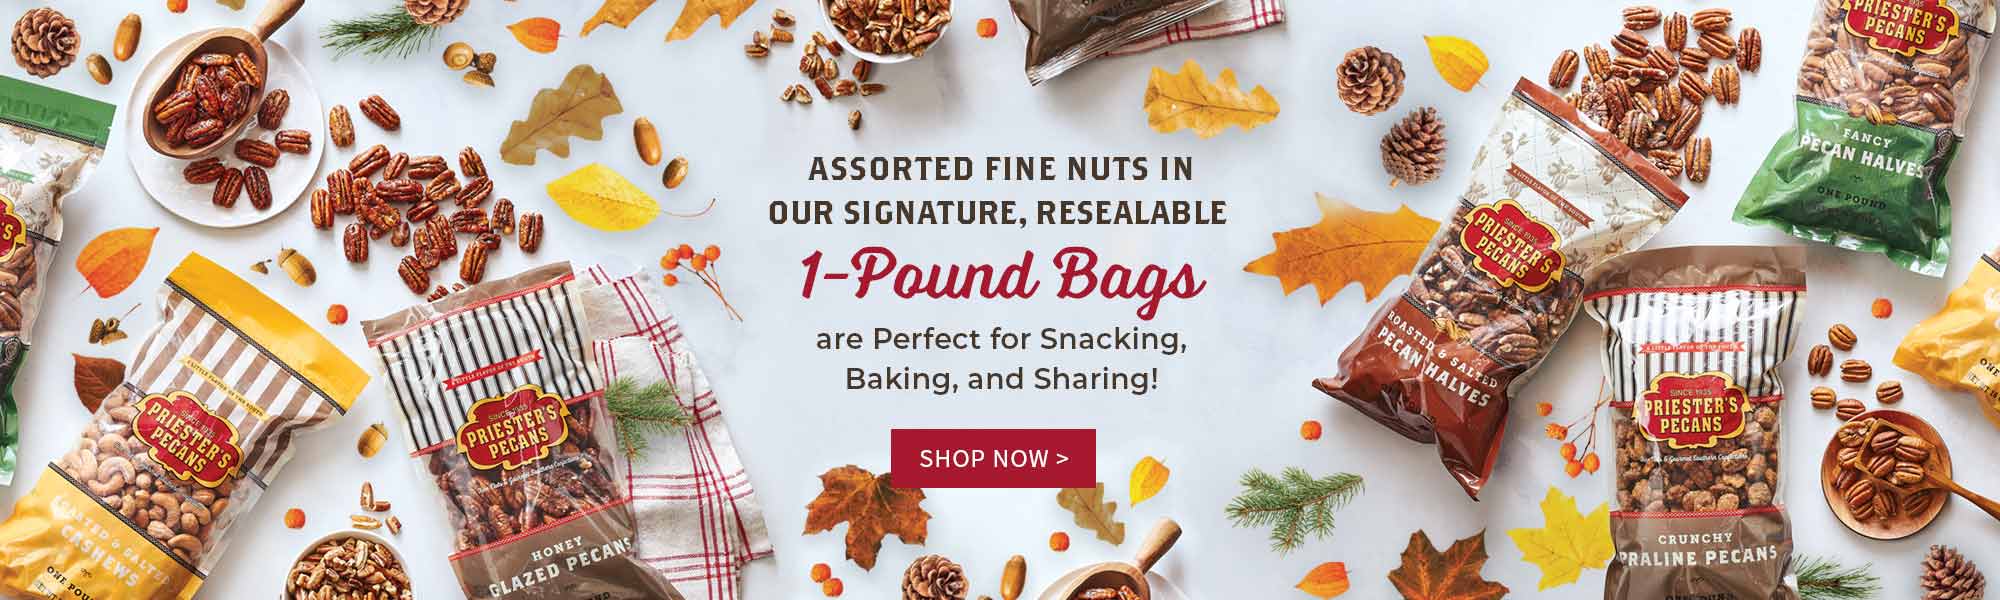 Assorted fine nuts in our signature, resealable  1-Pound Bags are perfect for snacking, baking, and sharing!